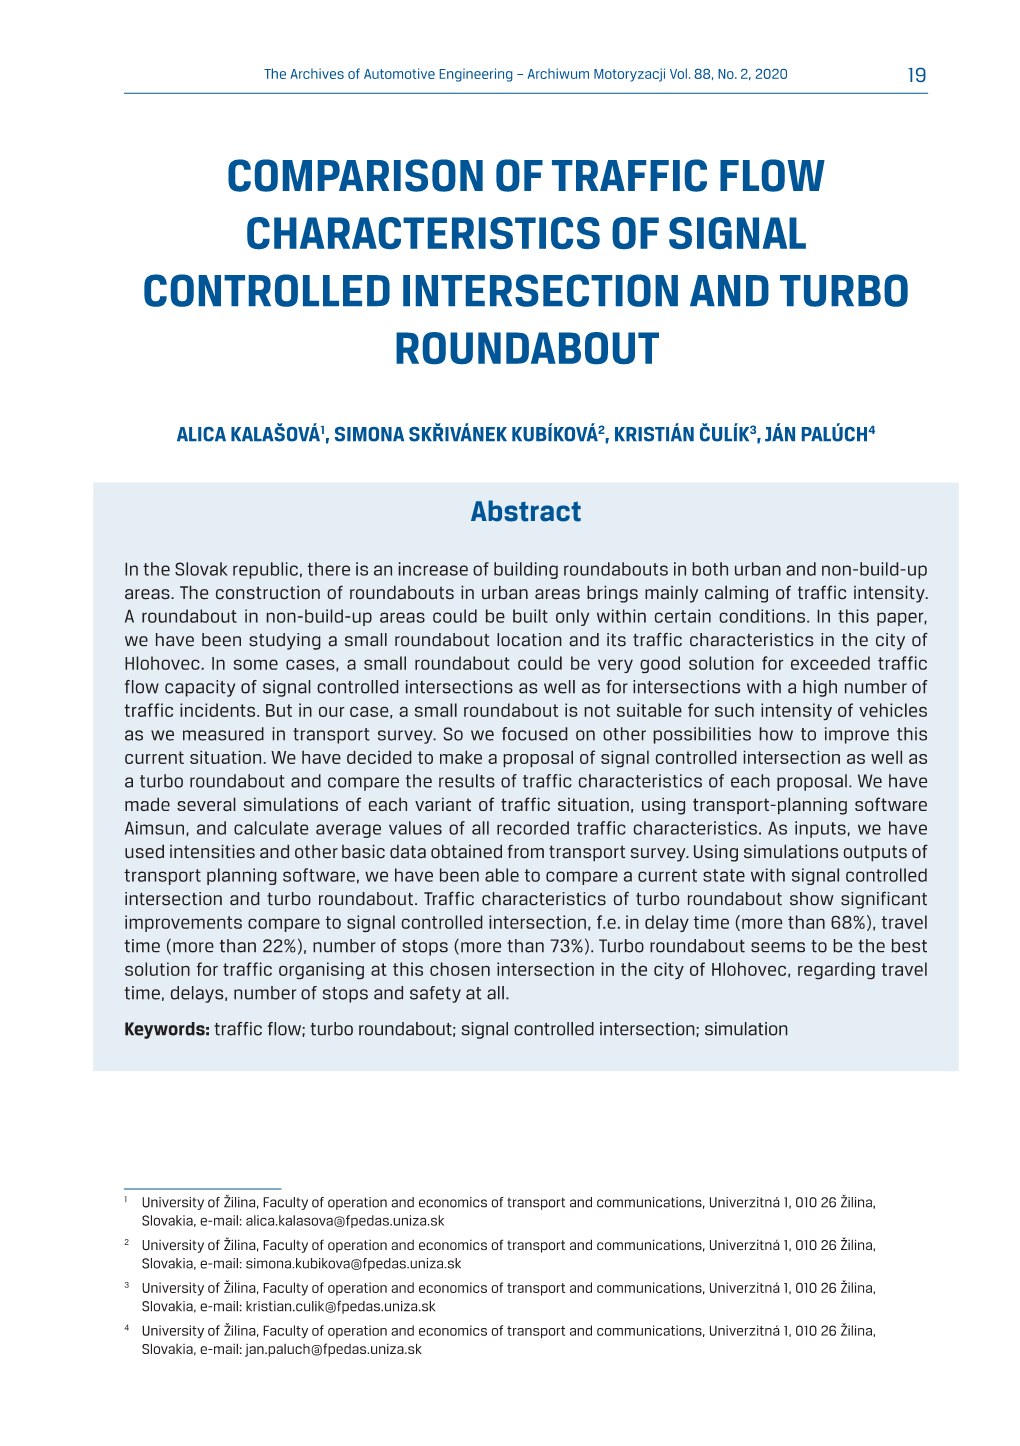 Comparison of Traffic Flow Characteristics of Signal Controlled Intersection and Turbo Roundabout